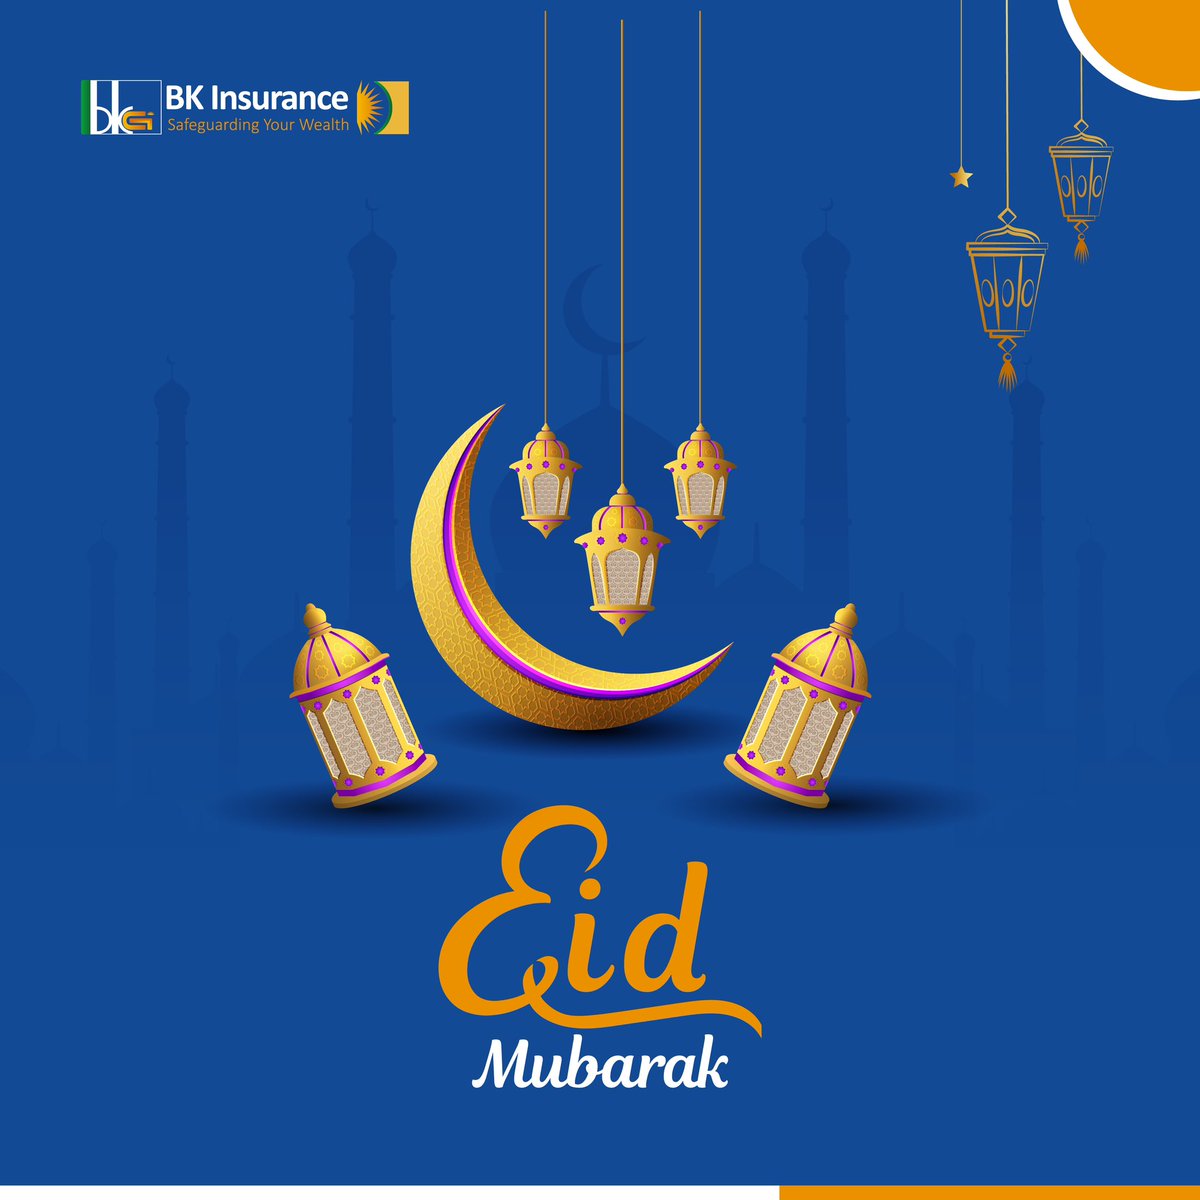 May Allah reward your fast with answered prayers, let this celebration bring you closer to the essence of gratitude and light. Eid Mubaraka to you and yours.